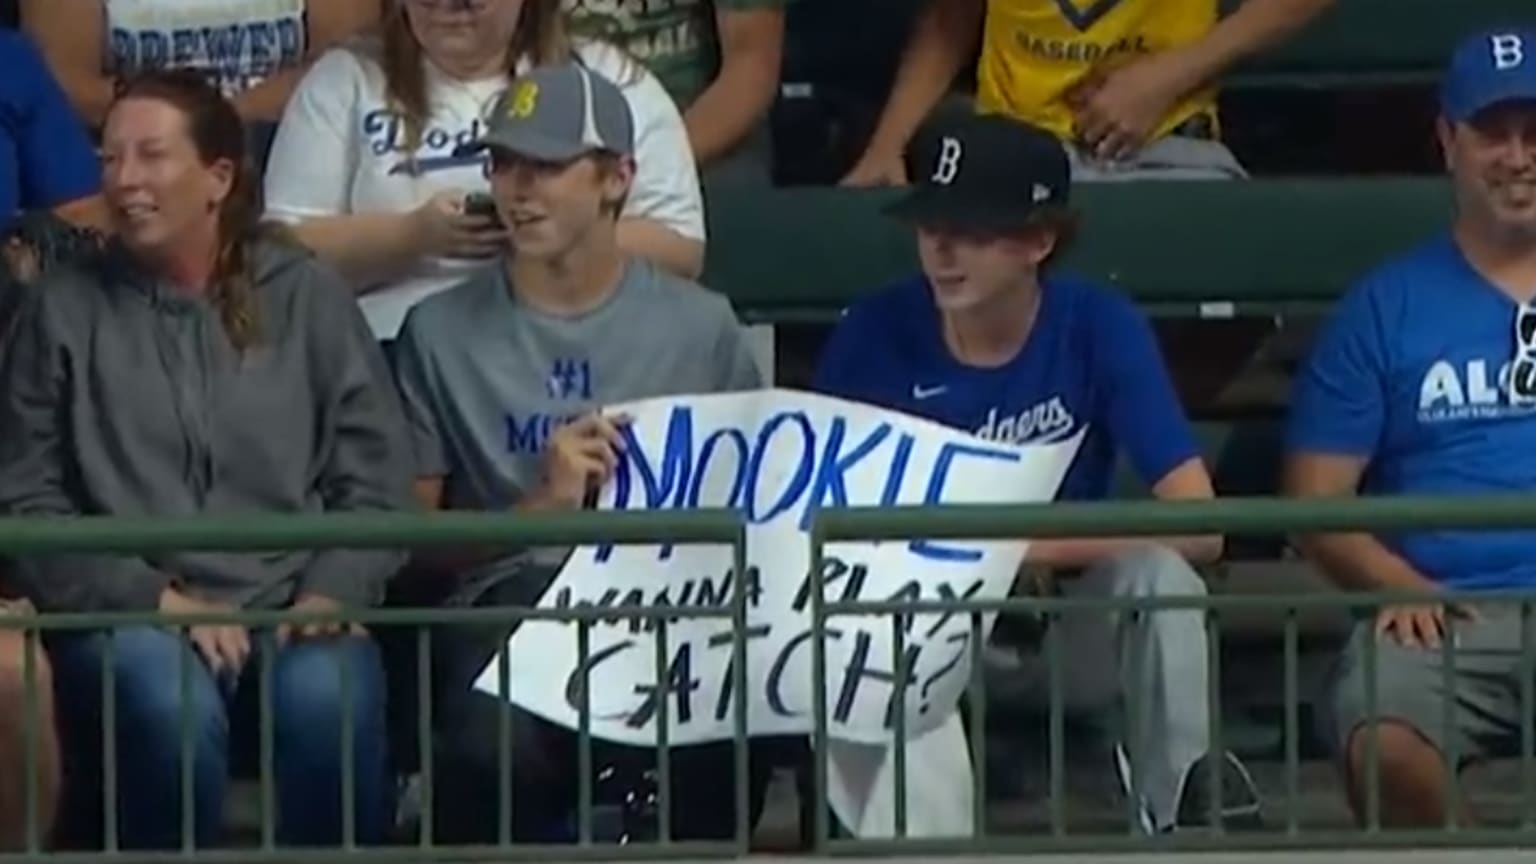 Two fans hold a sign reading, ''MOOKIE WANNA PLAY CATCH?''